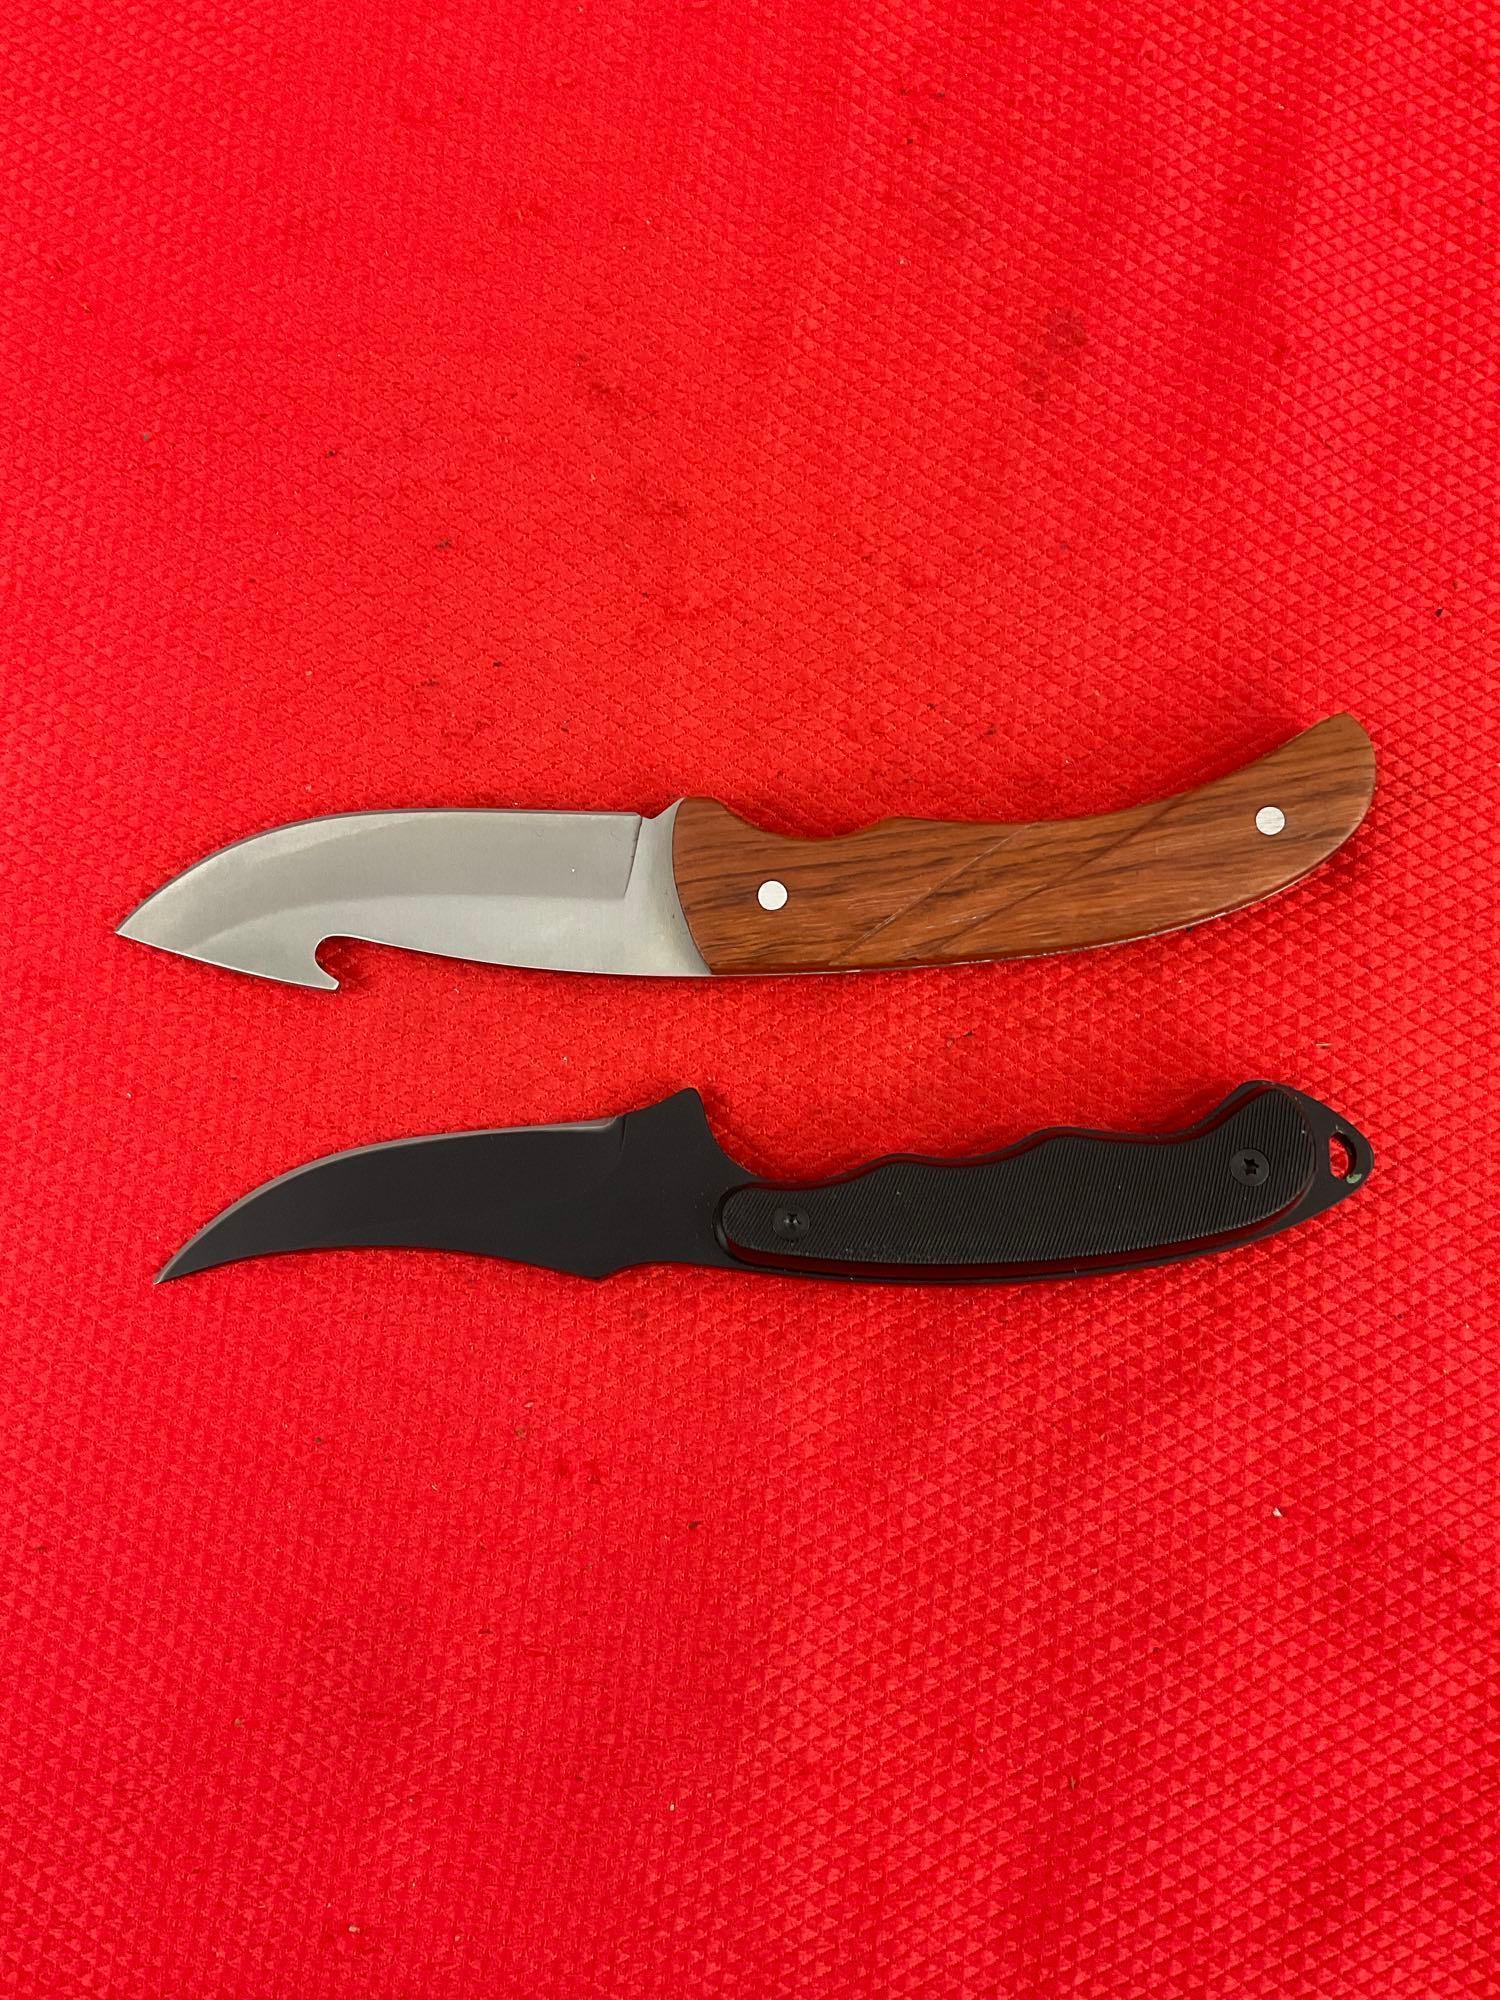 2 pcs Modern Winchester Steel Fixed Blade Hunting Knives w/ Sheathes. 1x 22-09447. See pics.